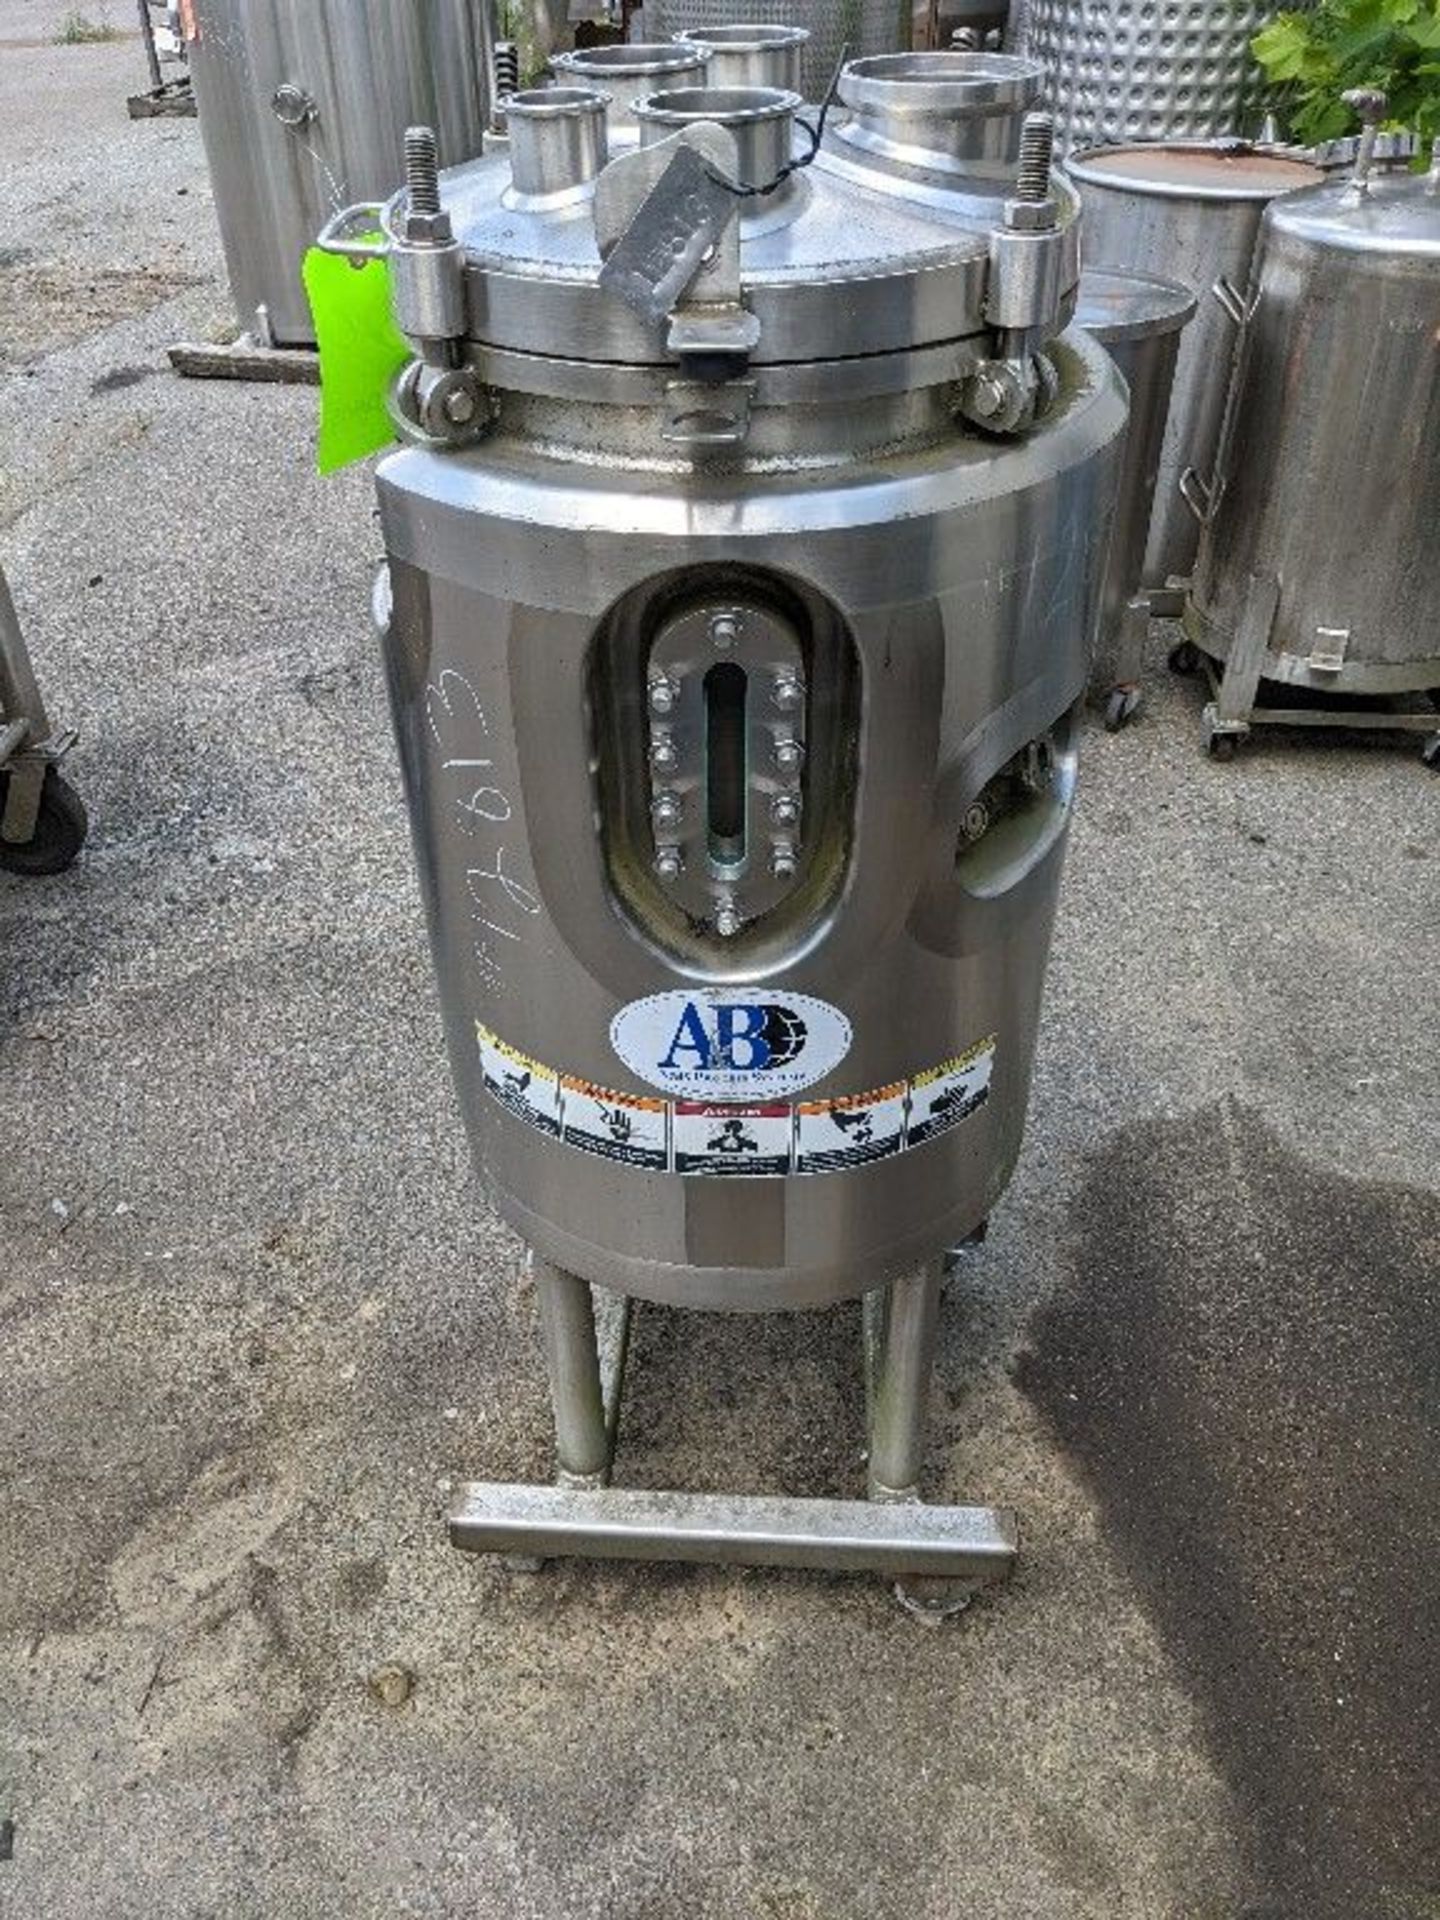 Qty (1) A+B Process Jacketed Vertical Stainless Steel Pressure Tank or Reactor 20 Gallon -